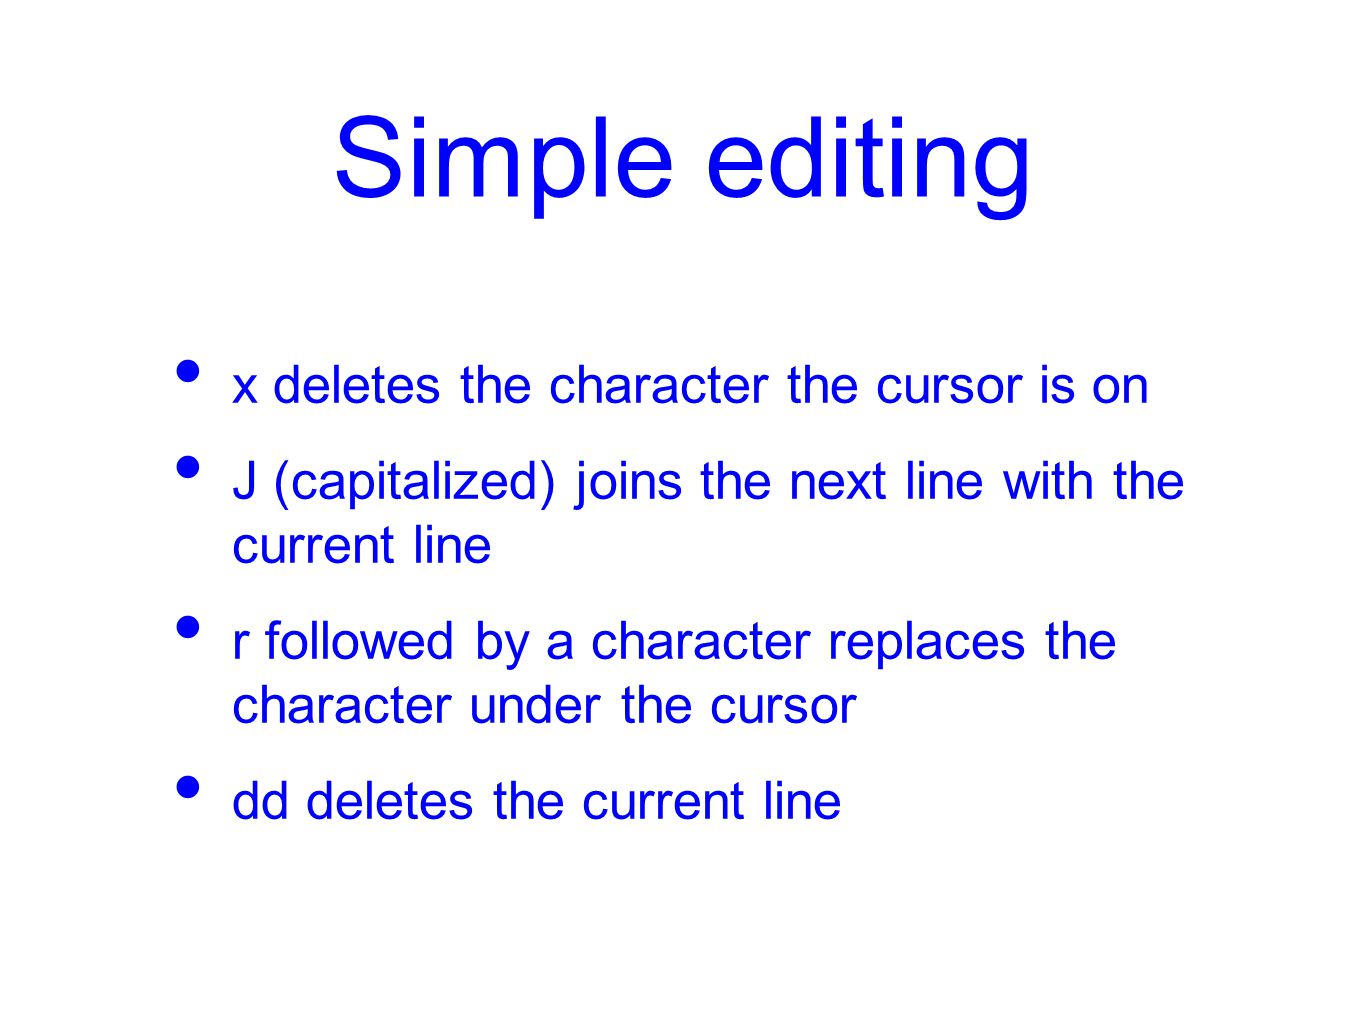 Simple editing x deletes the character the cursor is on J (capitalized) joins the next line with the current line r followed by a character replaces the character under the cursor dd deletes the current line